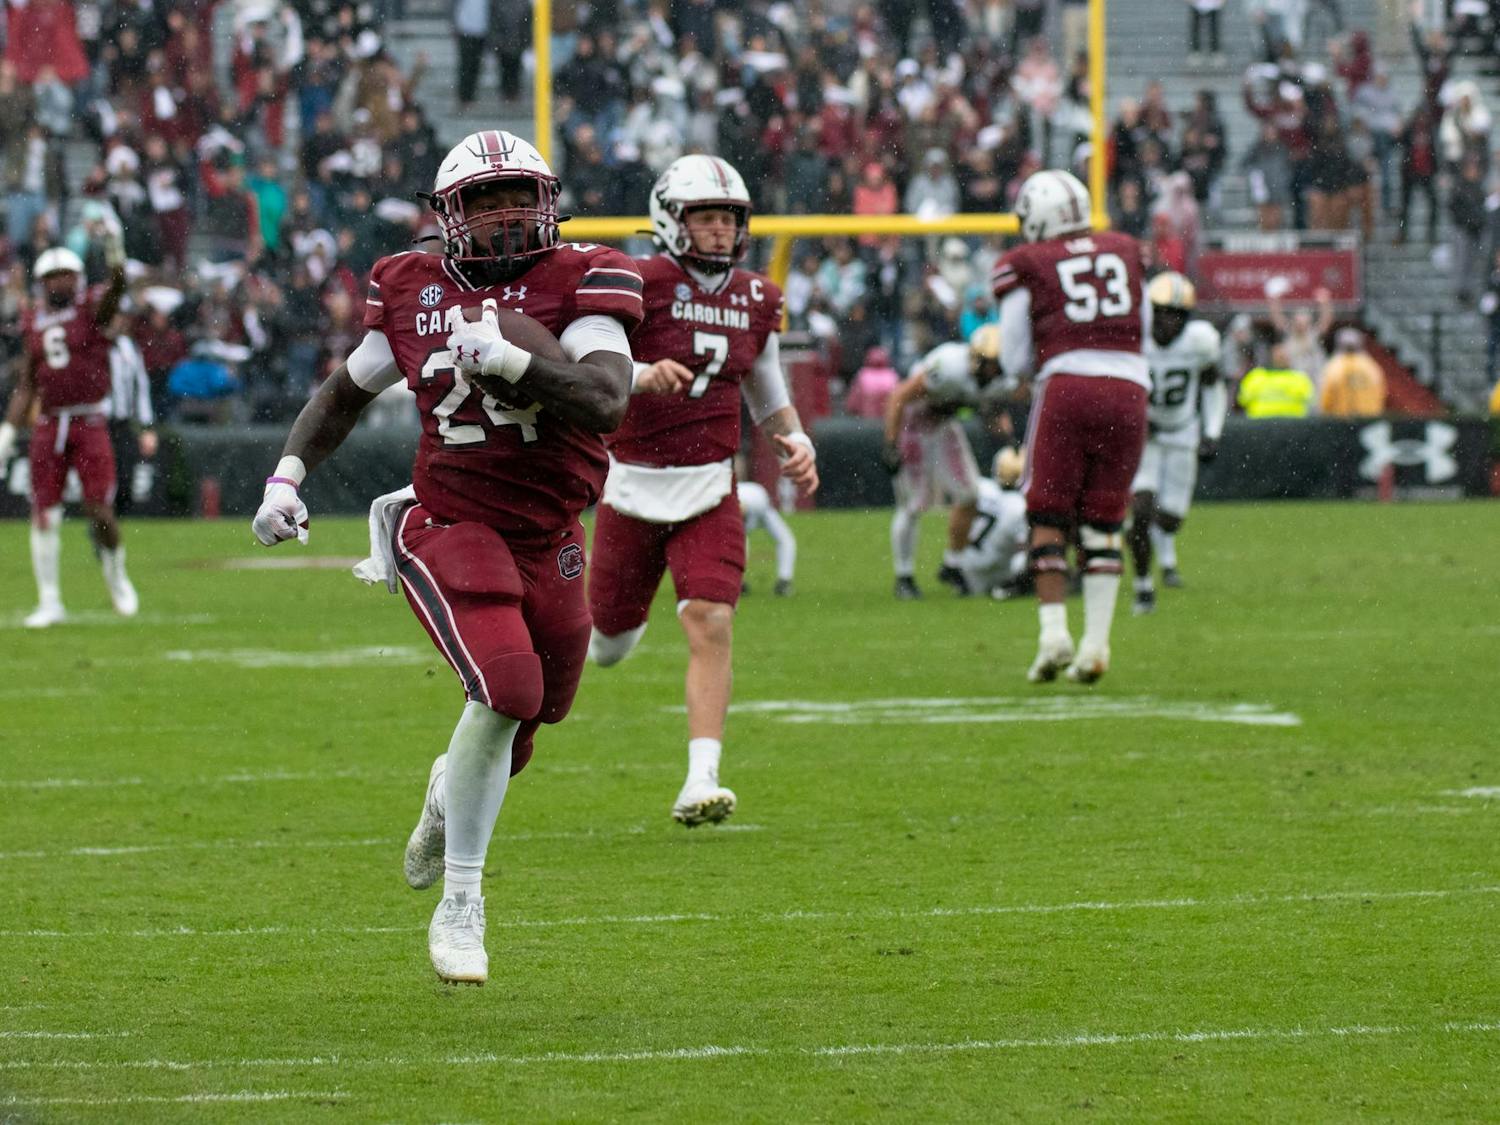 Redshirt senior running back Mario Anderson sprints to the end zone, scoring a touchdown for the Gamecocks on Nov. 11, 2023. It was Anderson's third touchdown of the season.